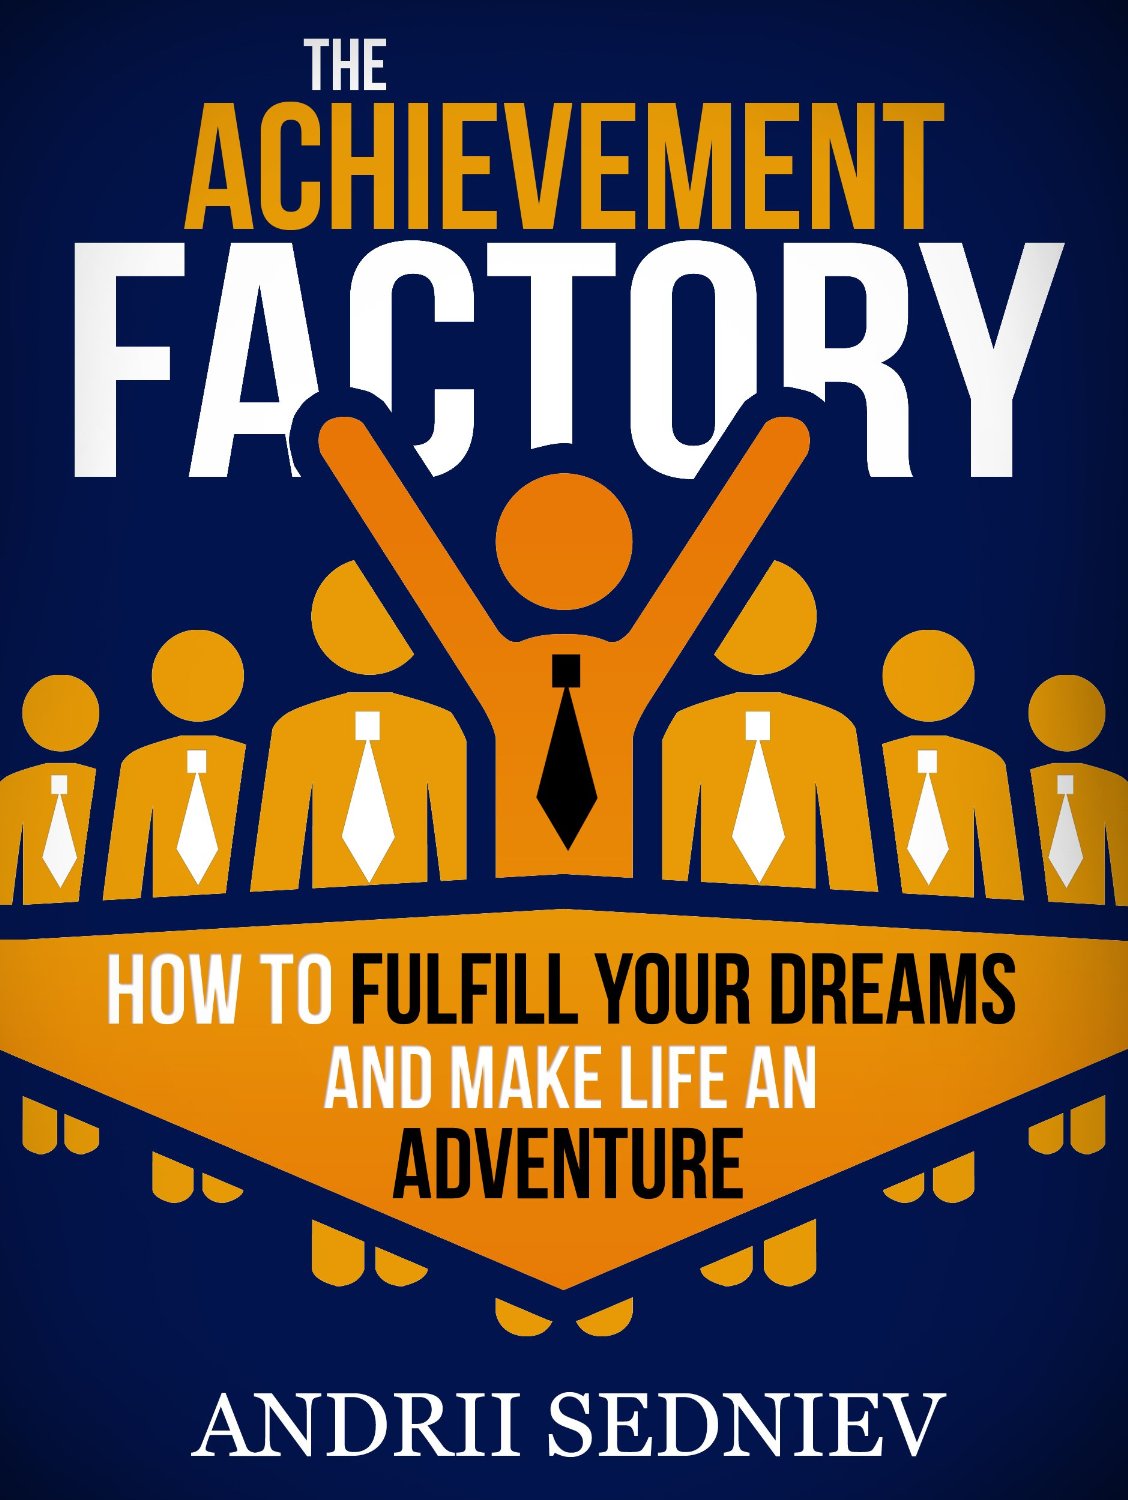 The Achievement Factory: How to Fulfill Your Dreams and Make Life an Adventure by Andrii Sedniev